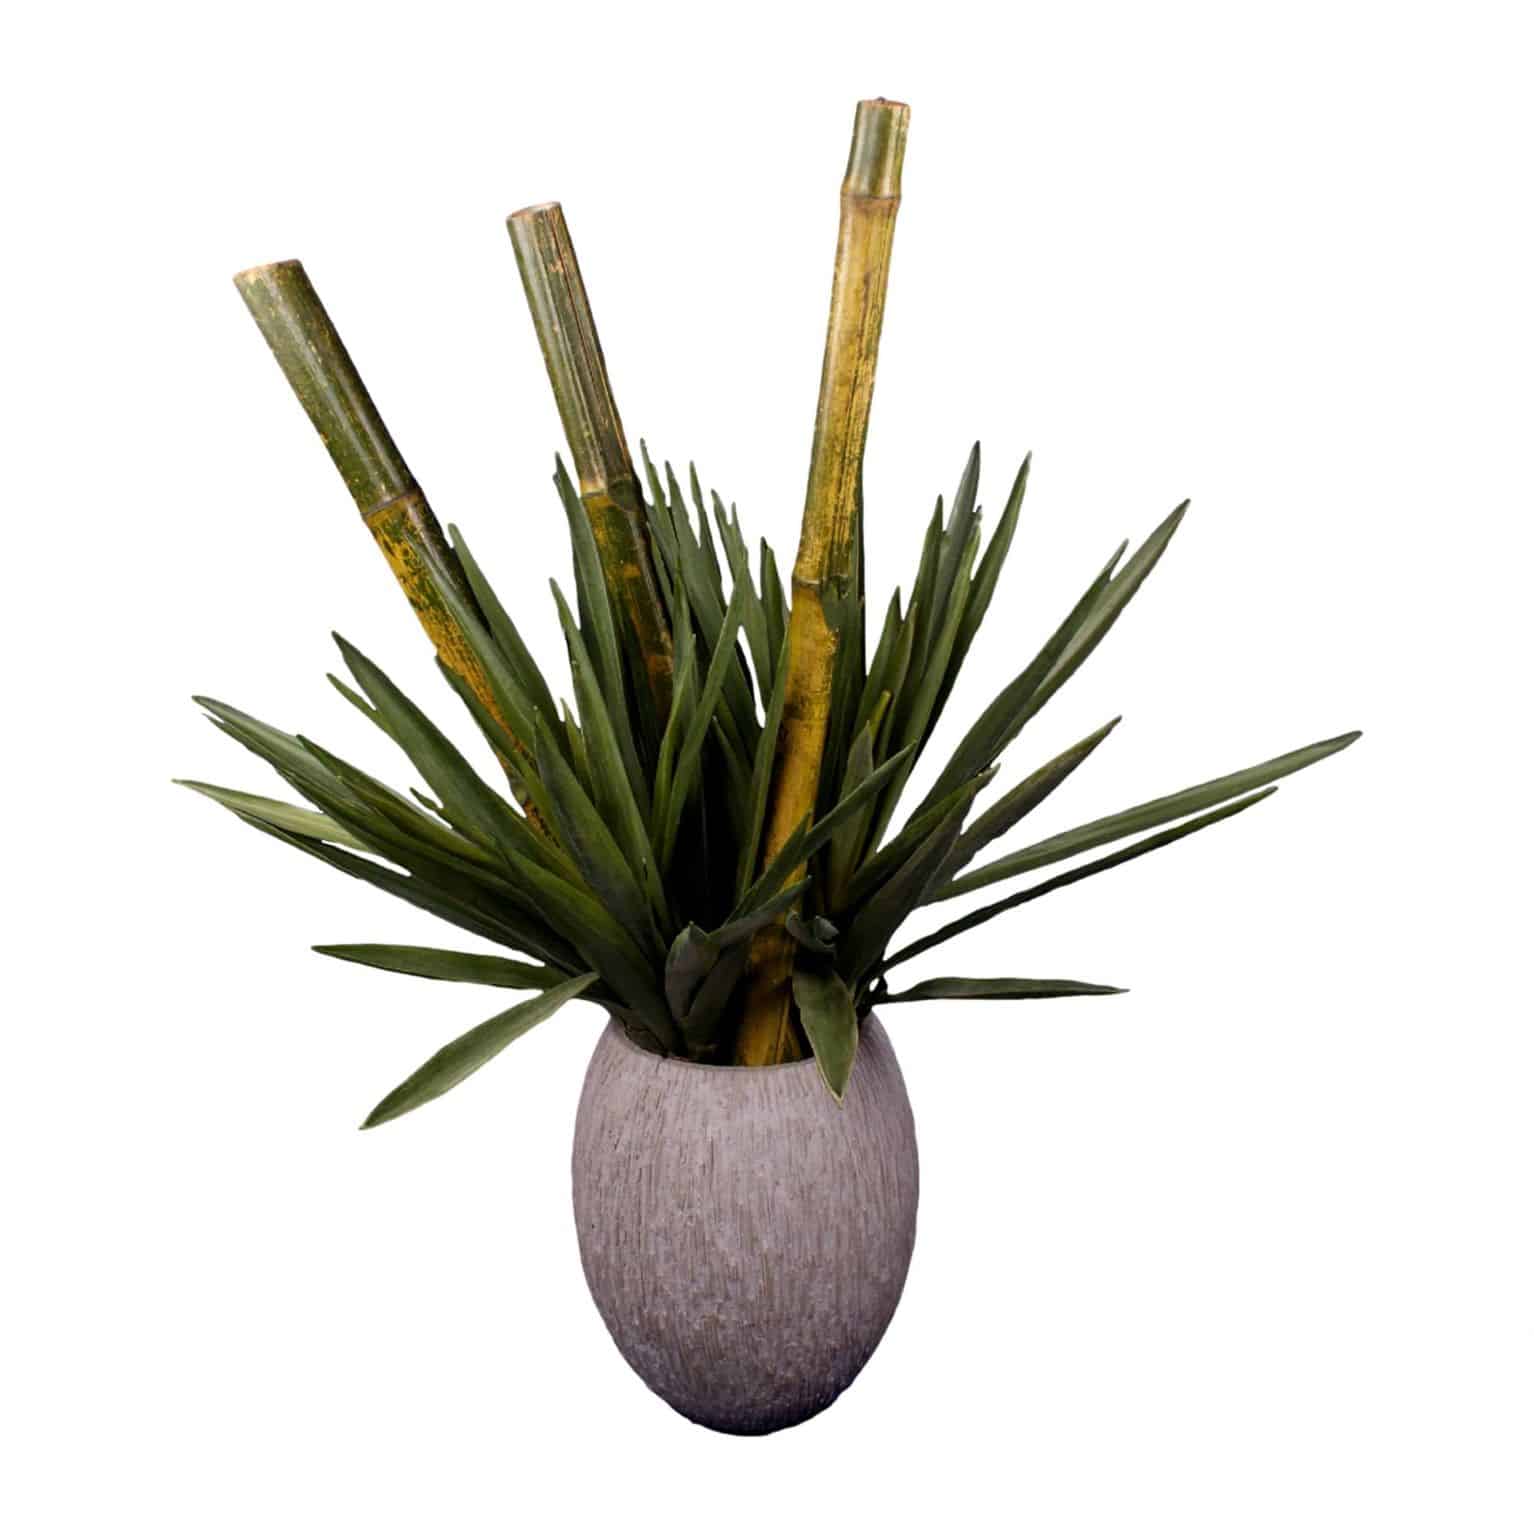 Shop for our artificial yucca plant. Truly realistic in colours and textures with bamboo this arrangement captures dramatic nature. Its also upkeep free.